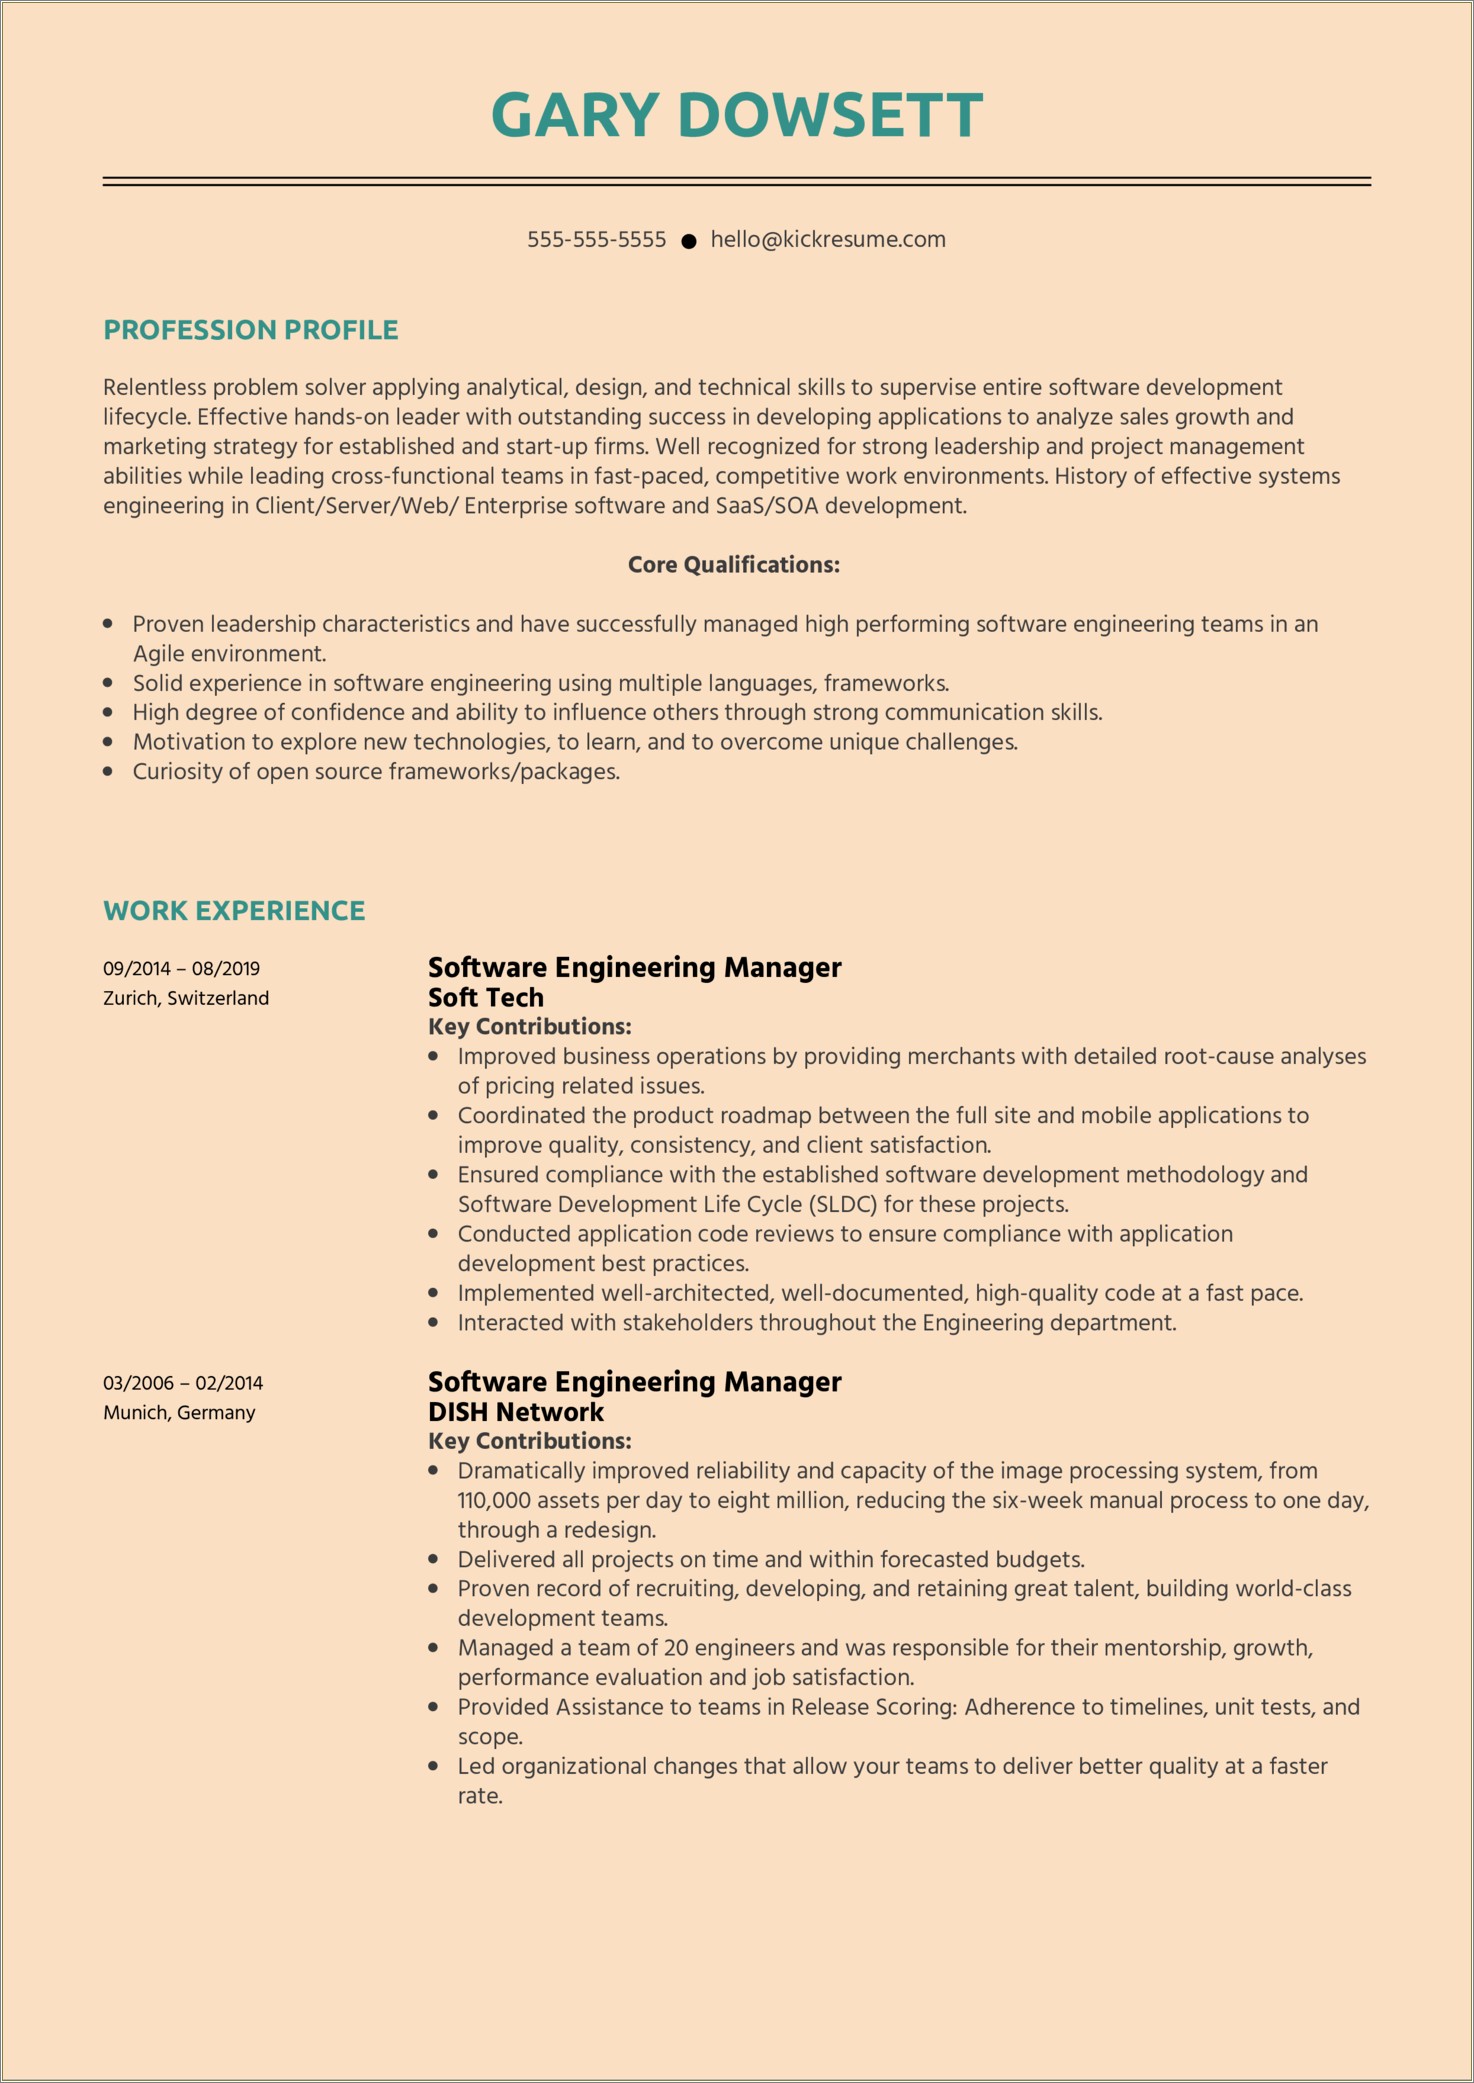 Good With Hands On Skill Resume